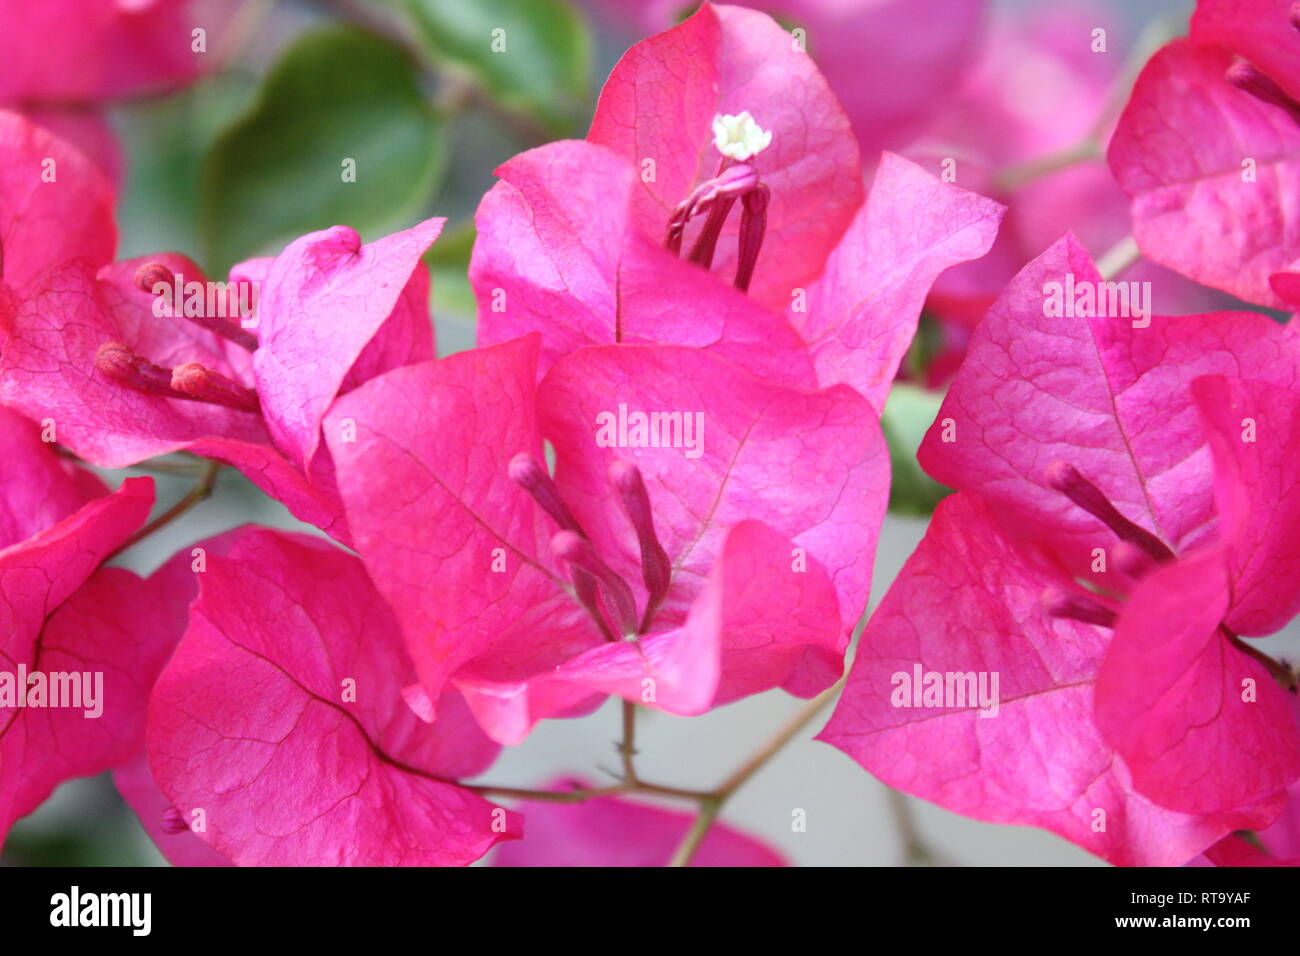 Beautiful cultivated flowering bougainvillea plant growing in the flower garden. Stock Photo